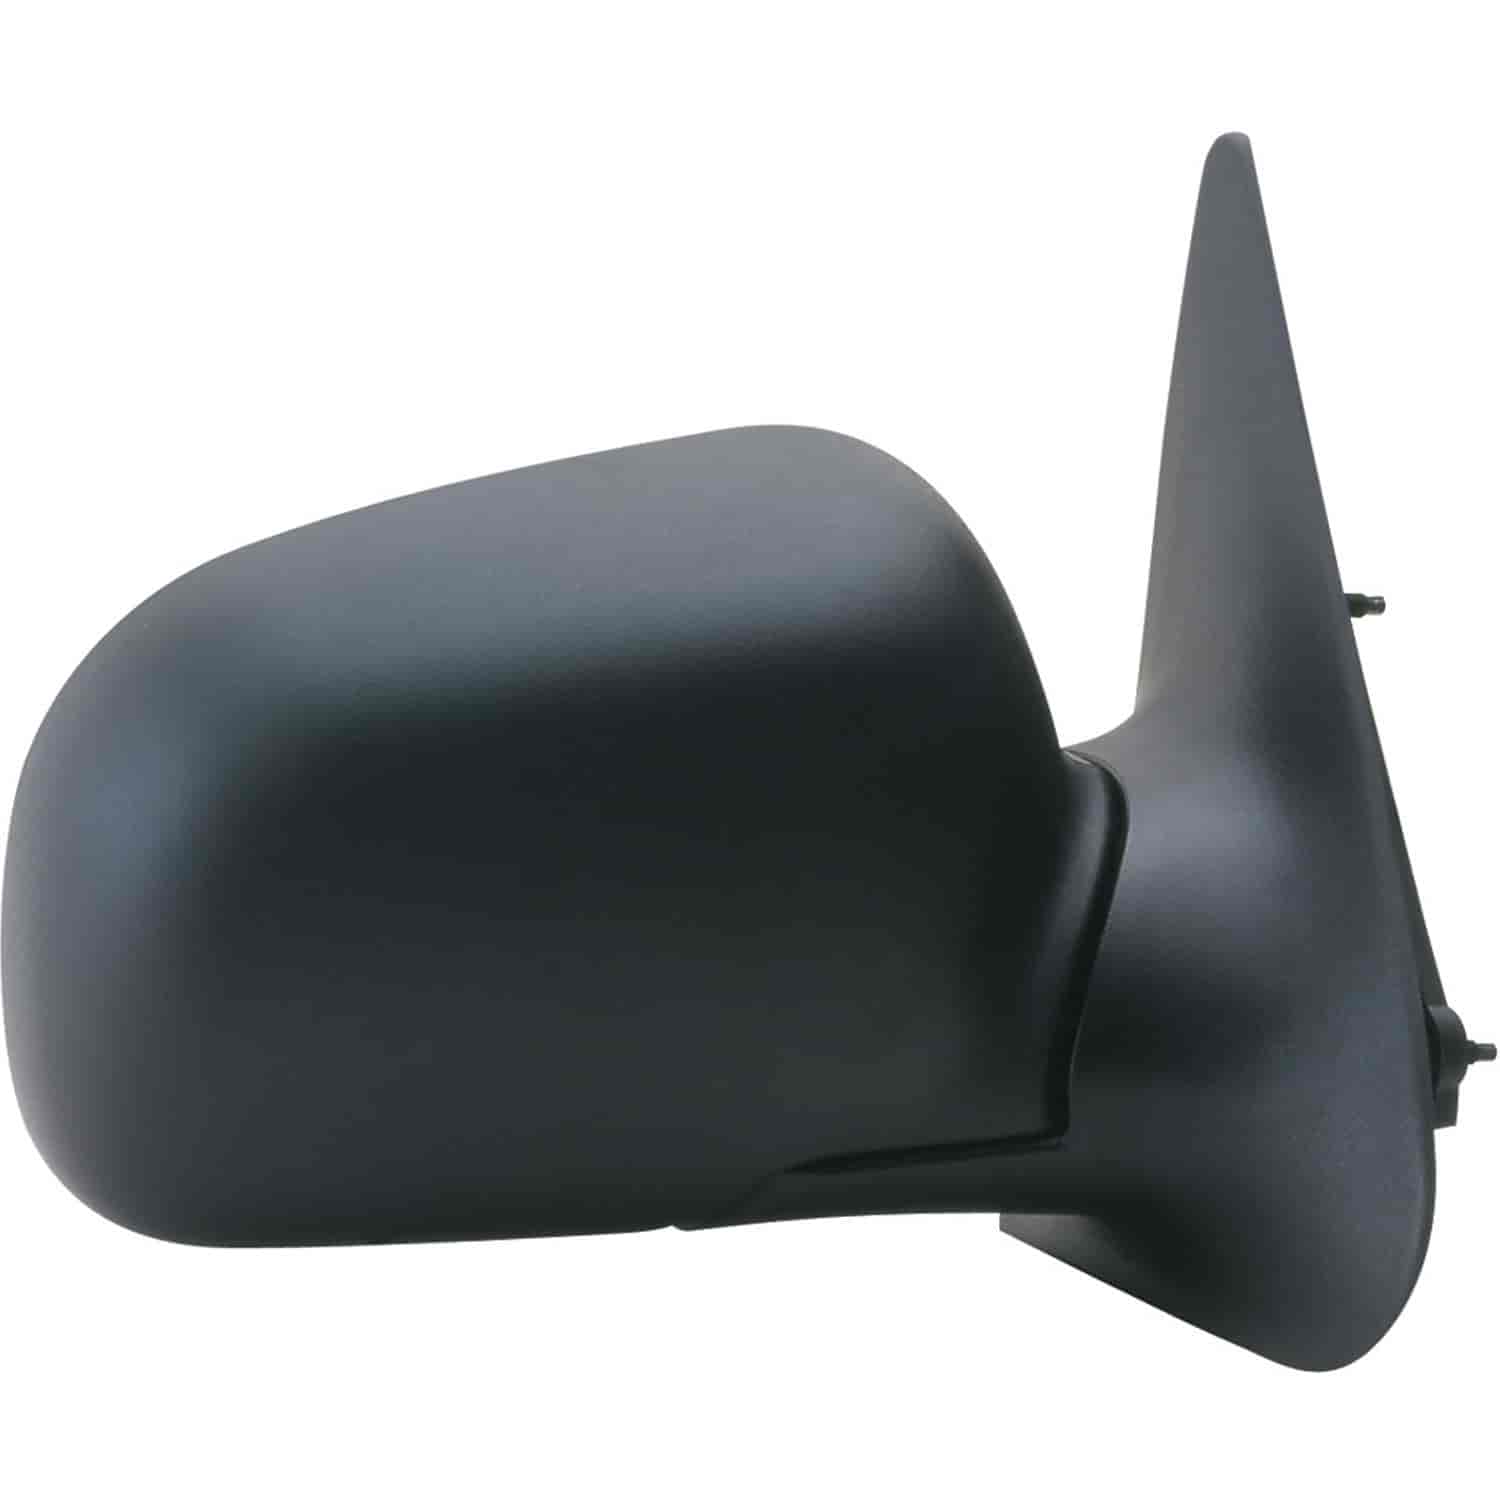 OEM Style Replacement mirror for 98-05 Ford Ranger Pick-Up passenger side mirror tested to fit and f